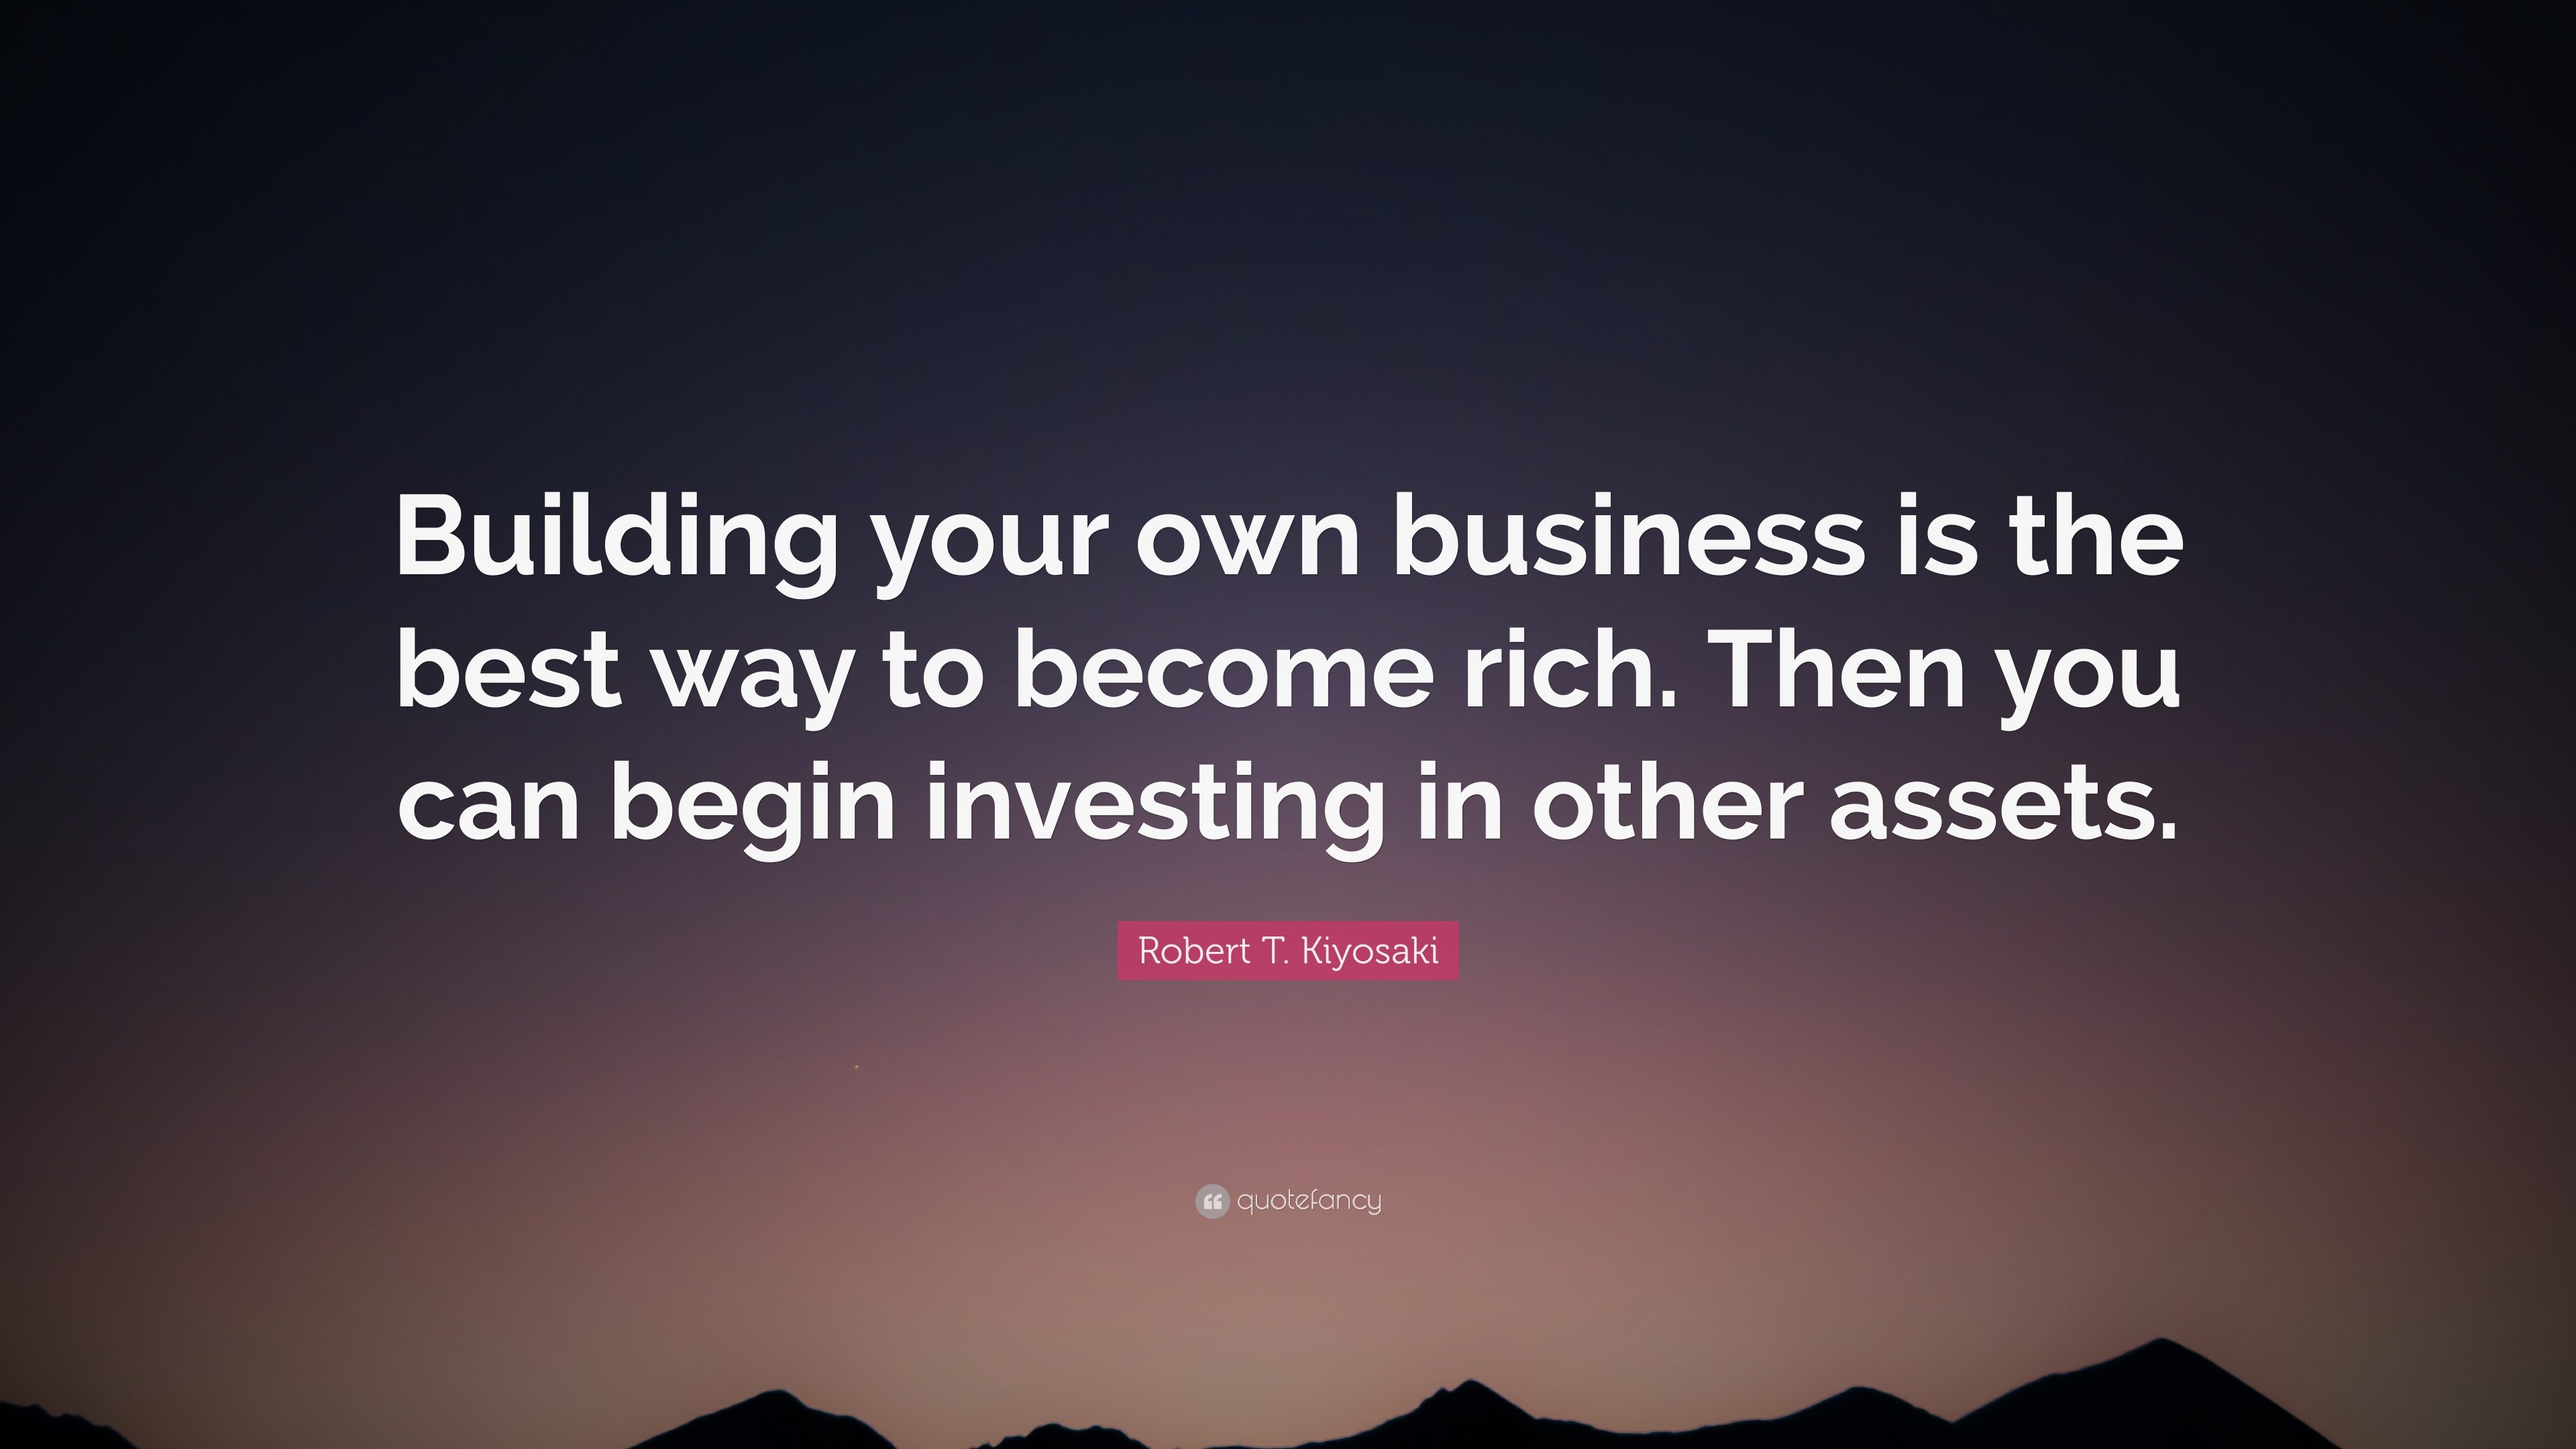 start your own business today